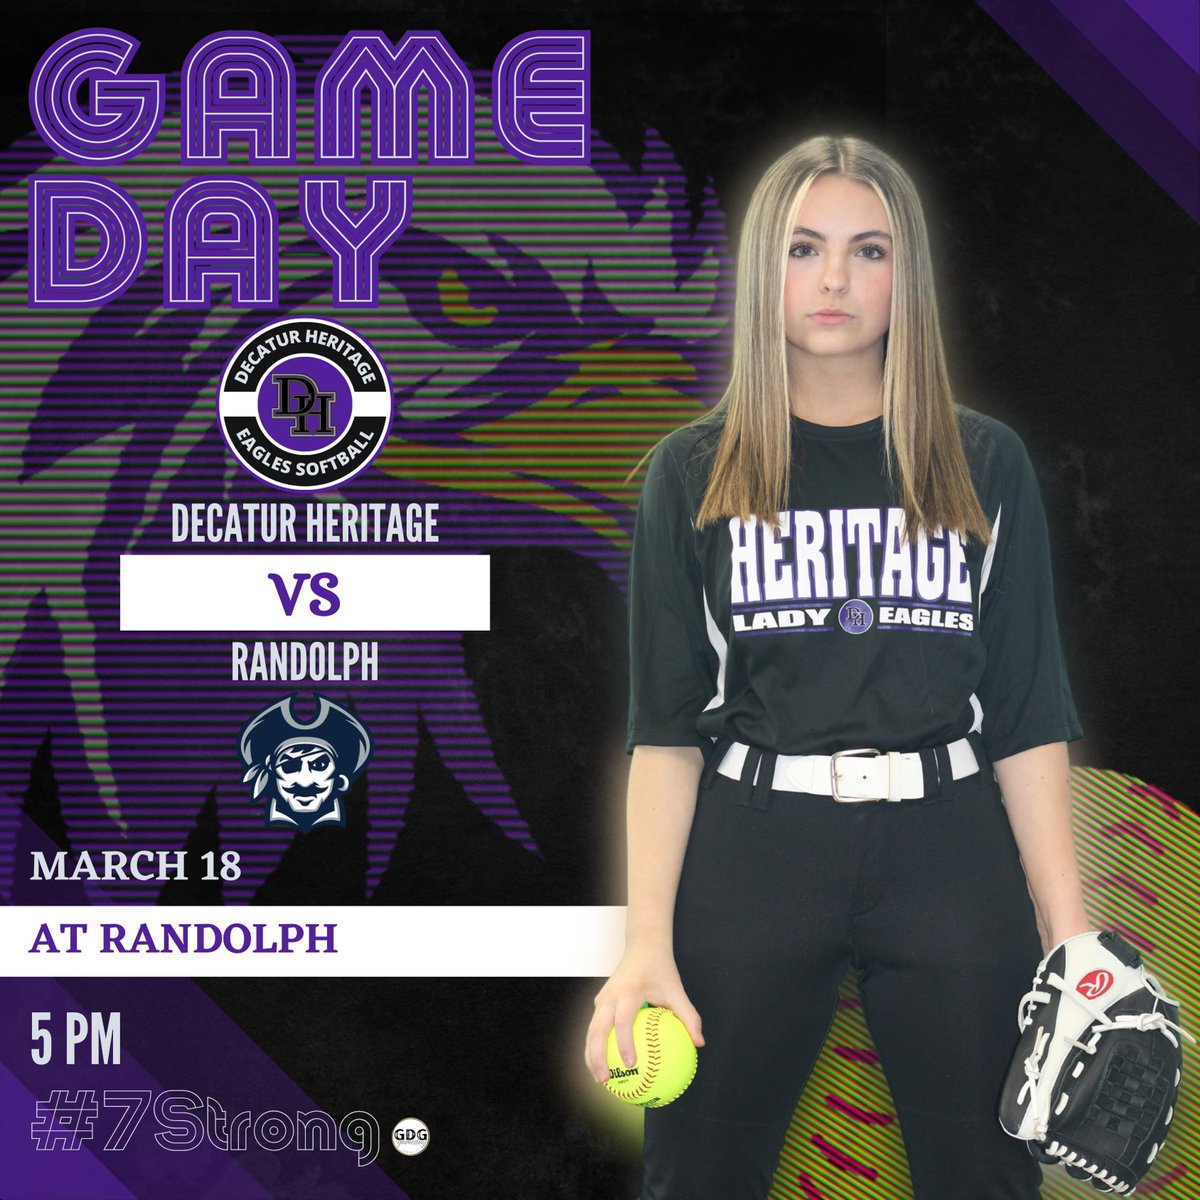 Let’s Go Lady Eagles! 💜🦅🥎 #7STRONG